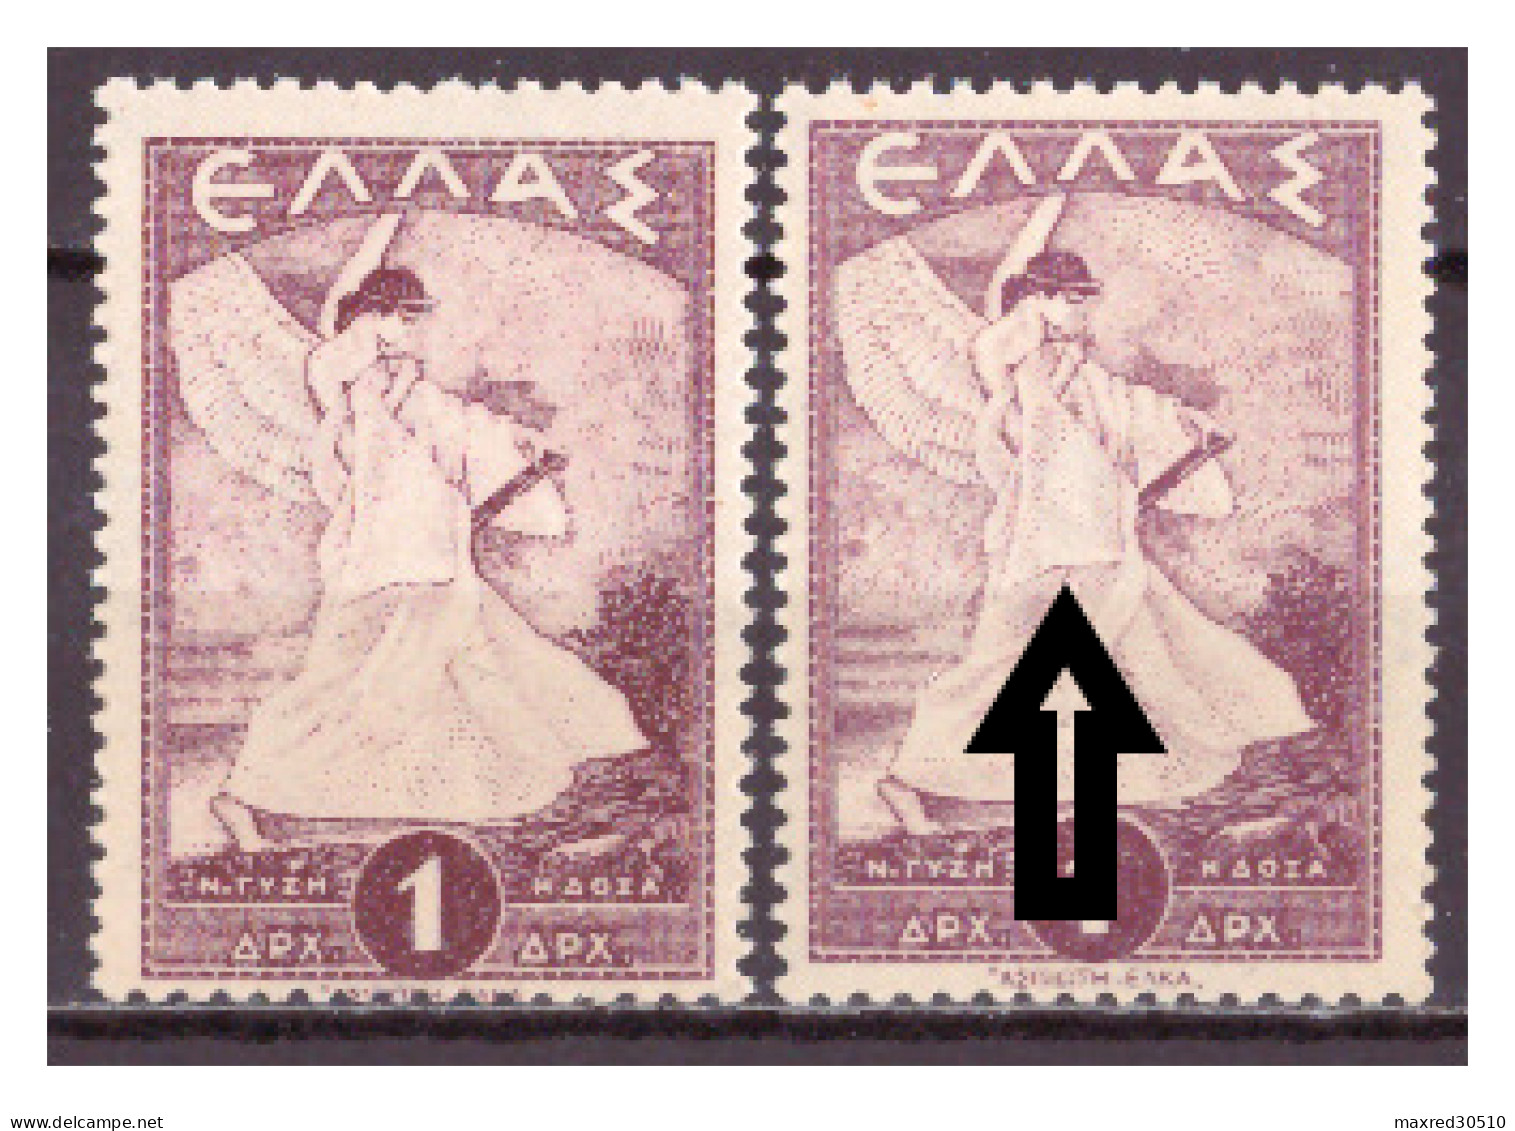 GREECE 1945 2X1L. OF THE "GLORY ISSUE" THE 2ND ONE (SEE ARROWS) WITH MIRROR PRINTING AT THE GUM ERROR MNH - Errors, Freaks & Oddities (EFO)